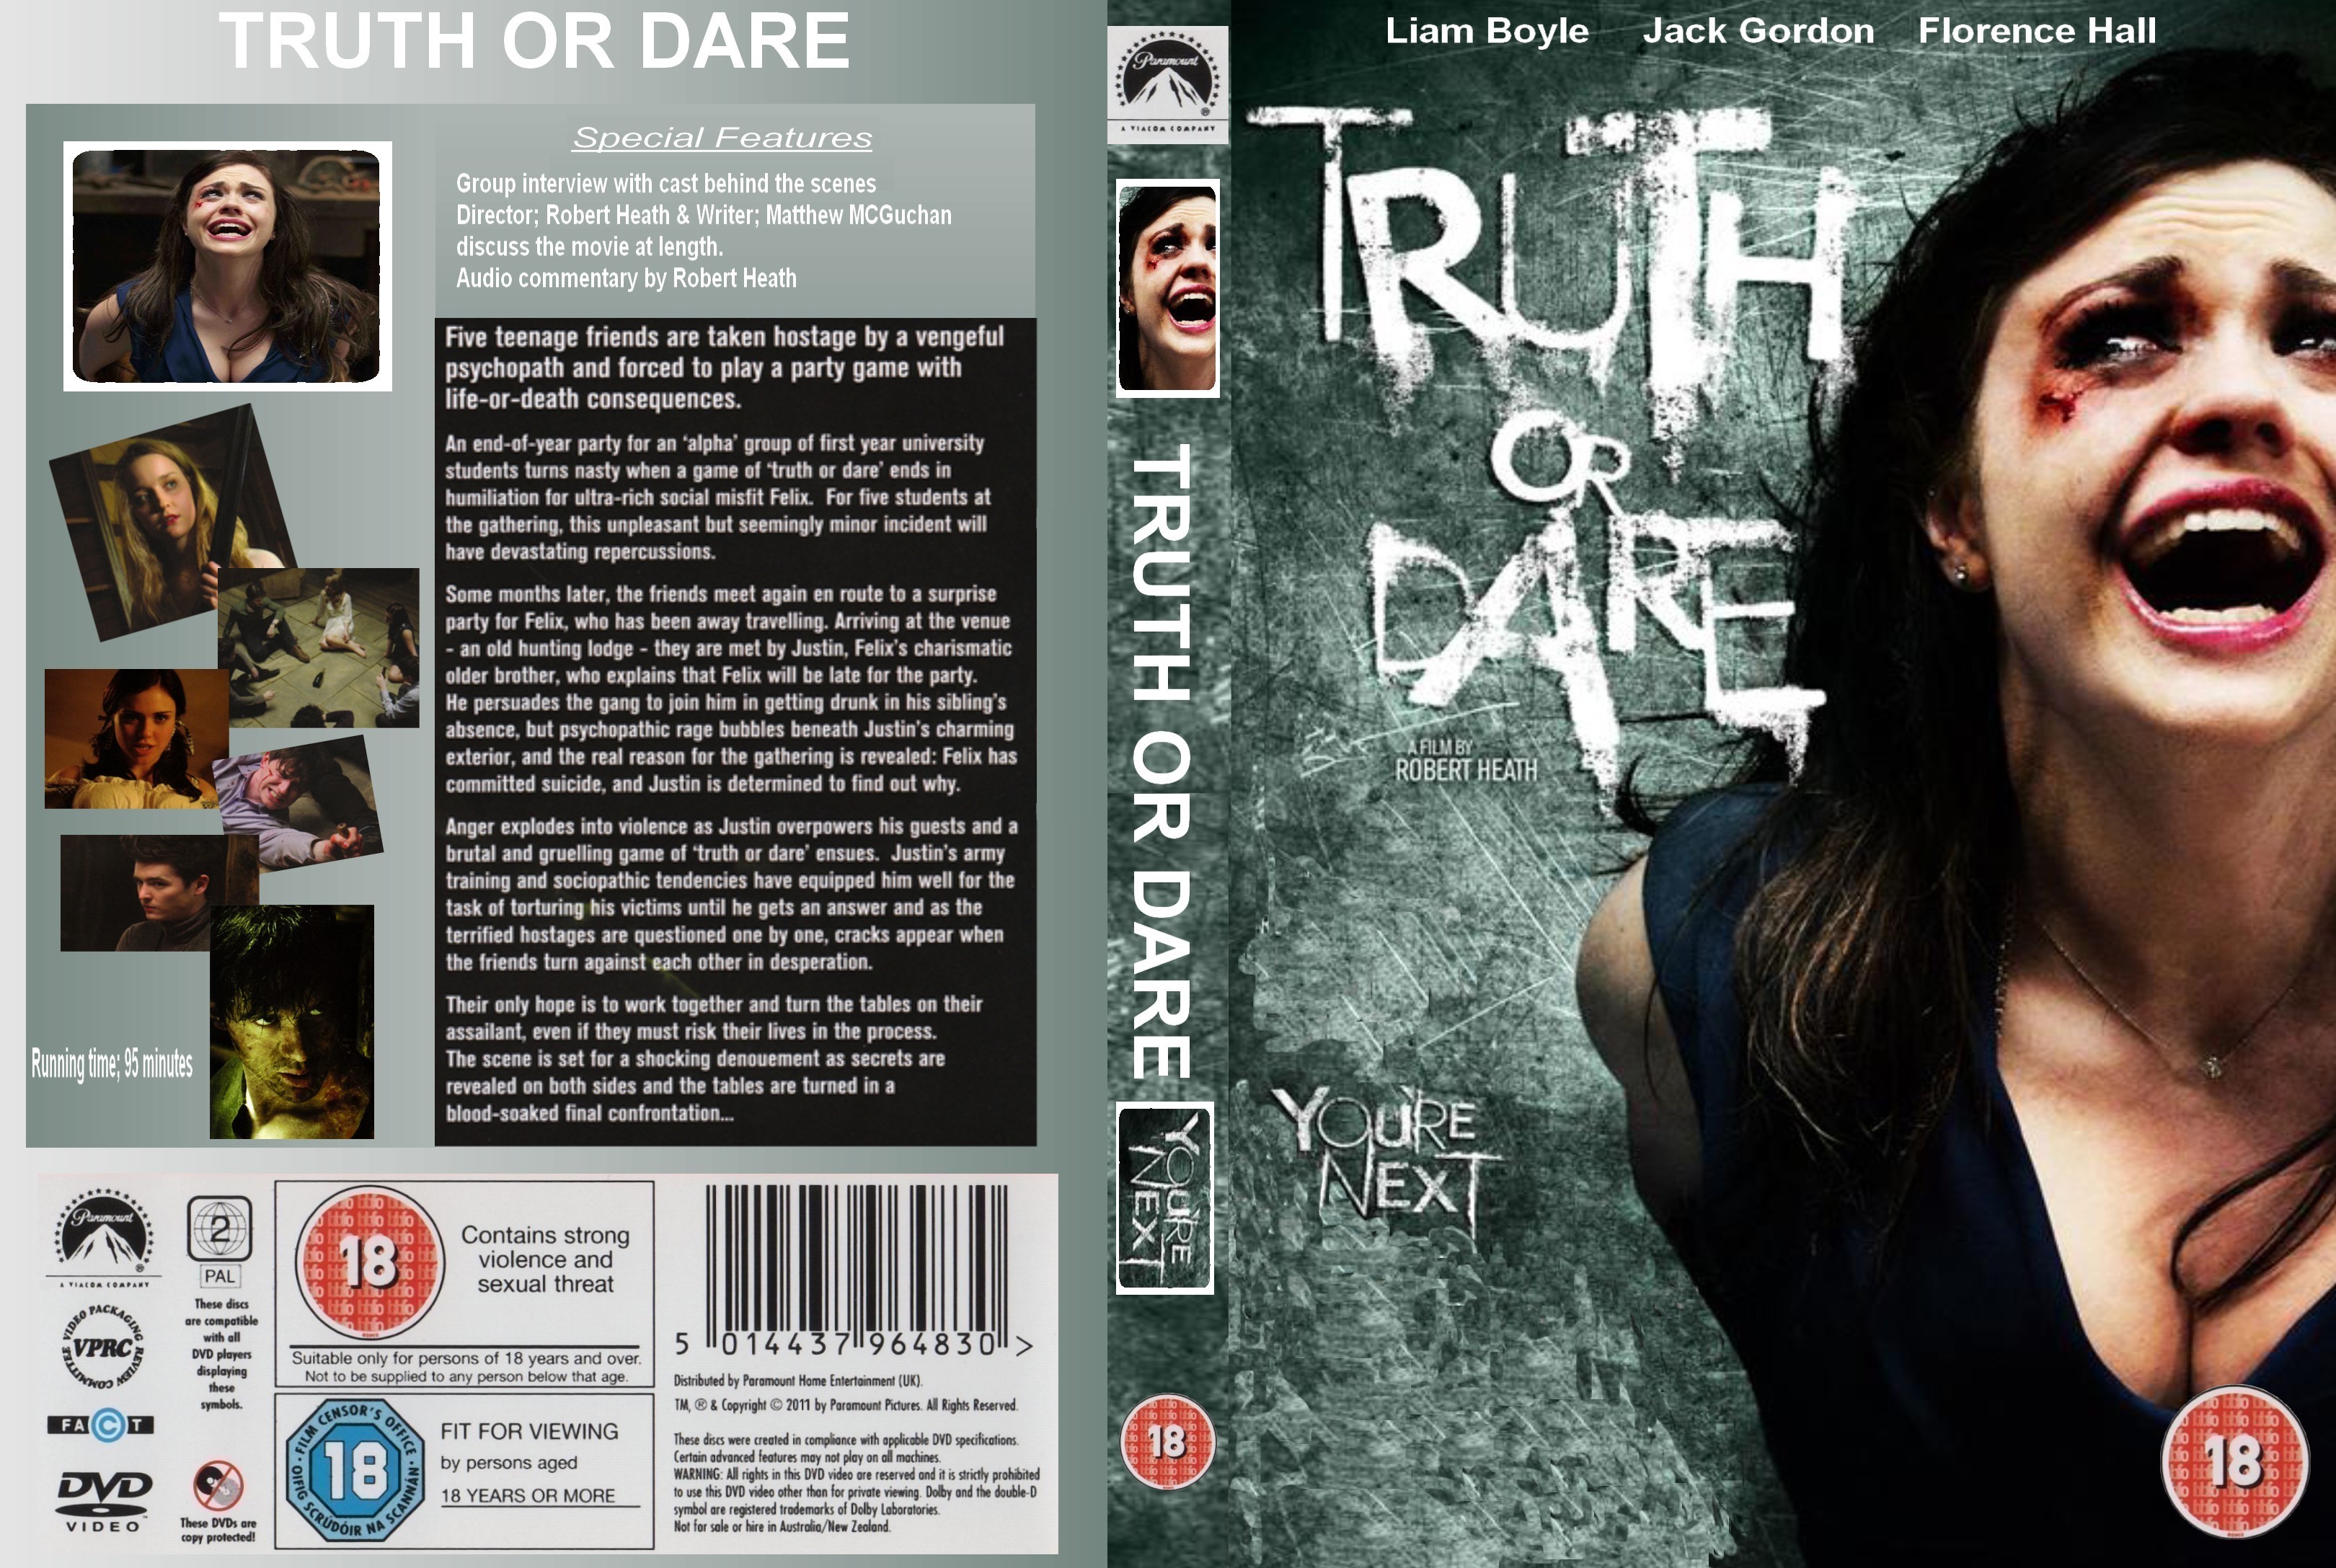 Truth or Dare (2012) Imdb-Dl - front.